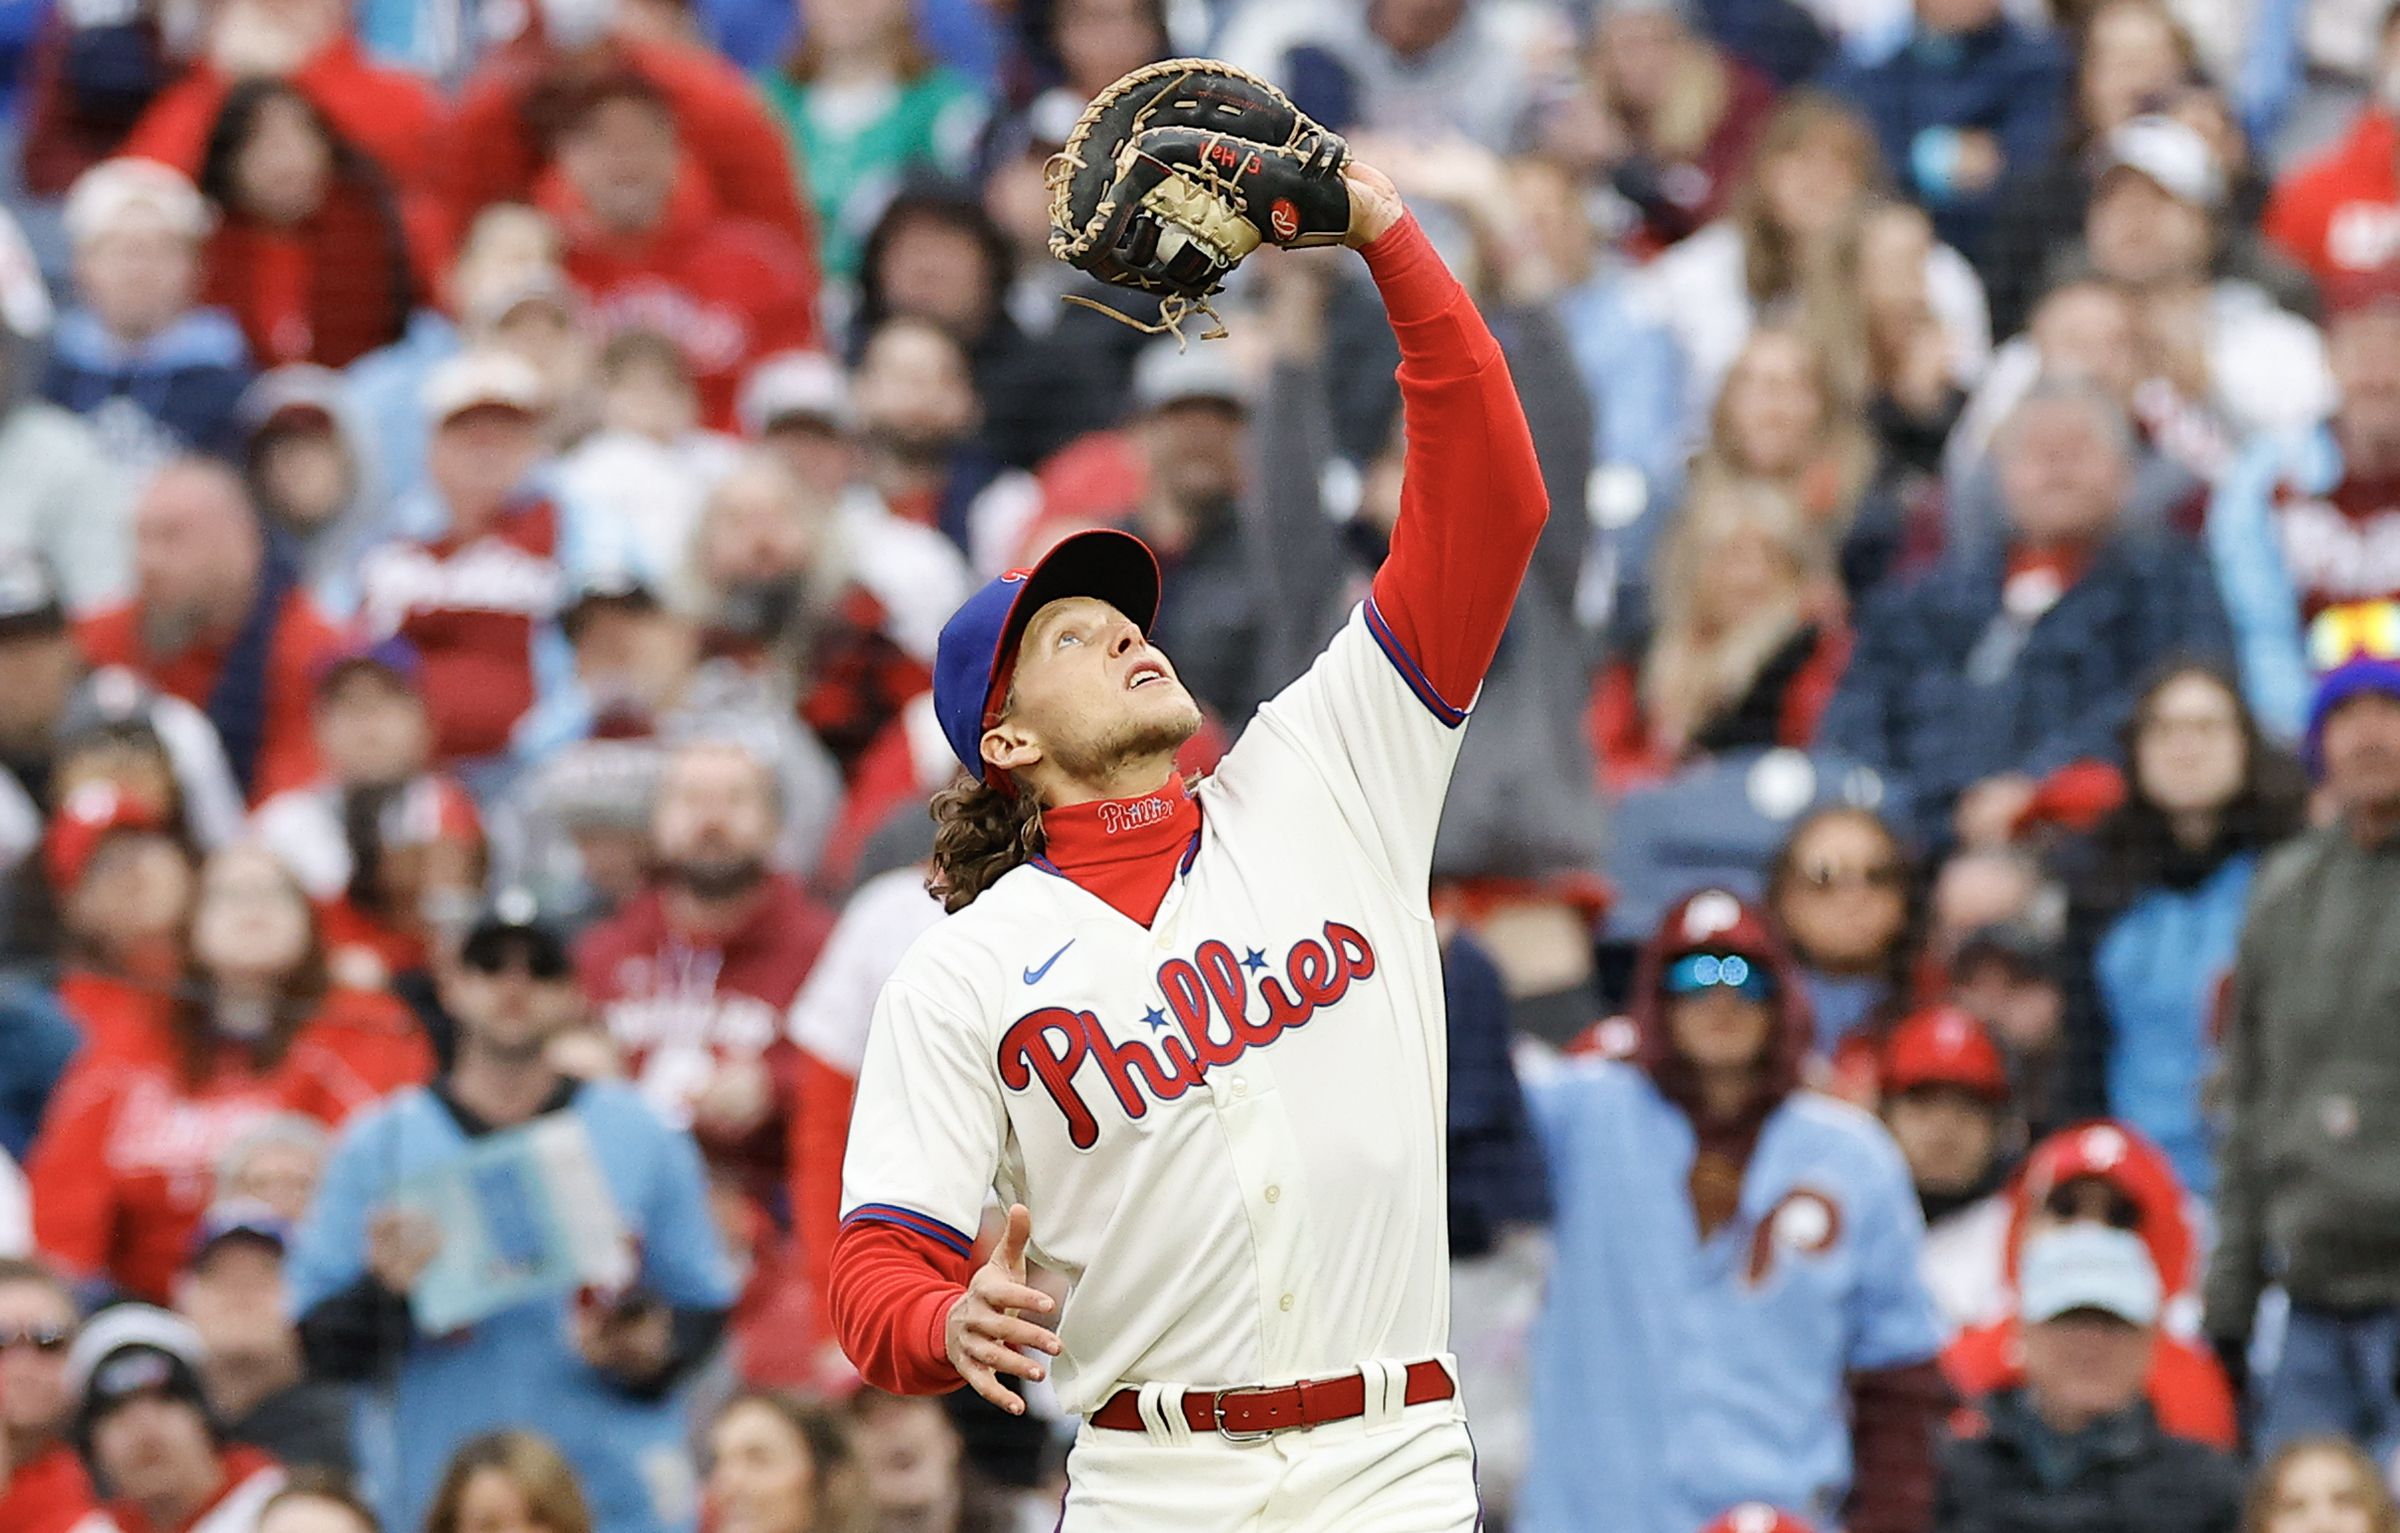 Here's an Awful Change That's Coming to Phillies Jerseys